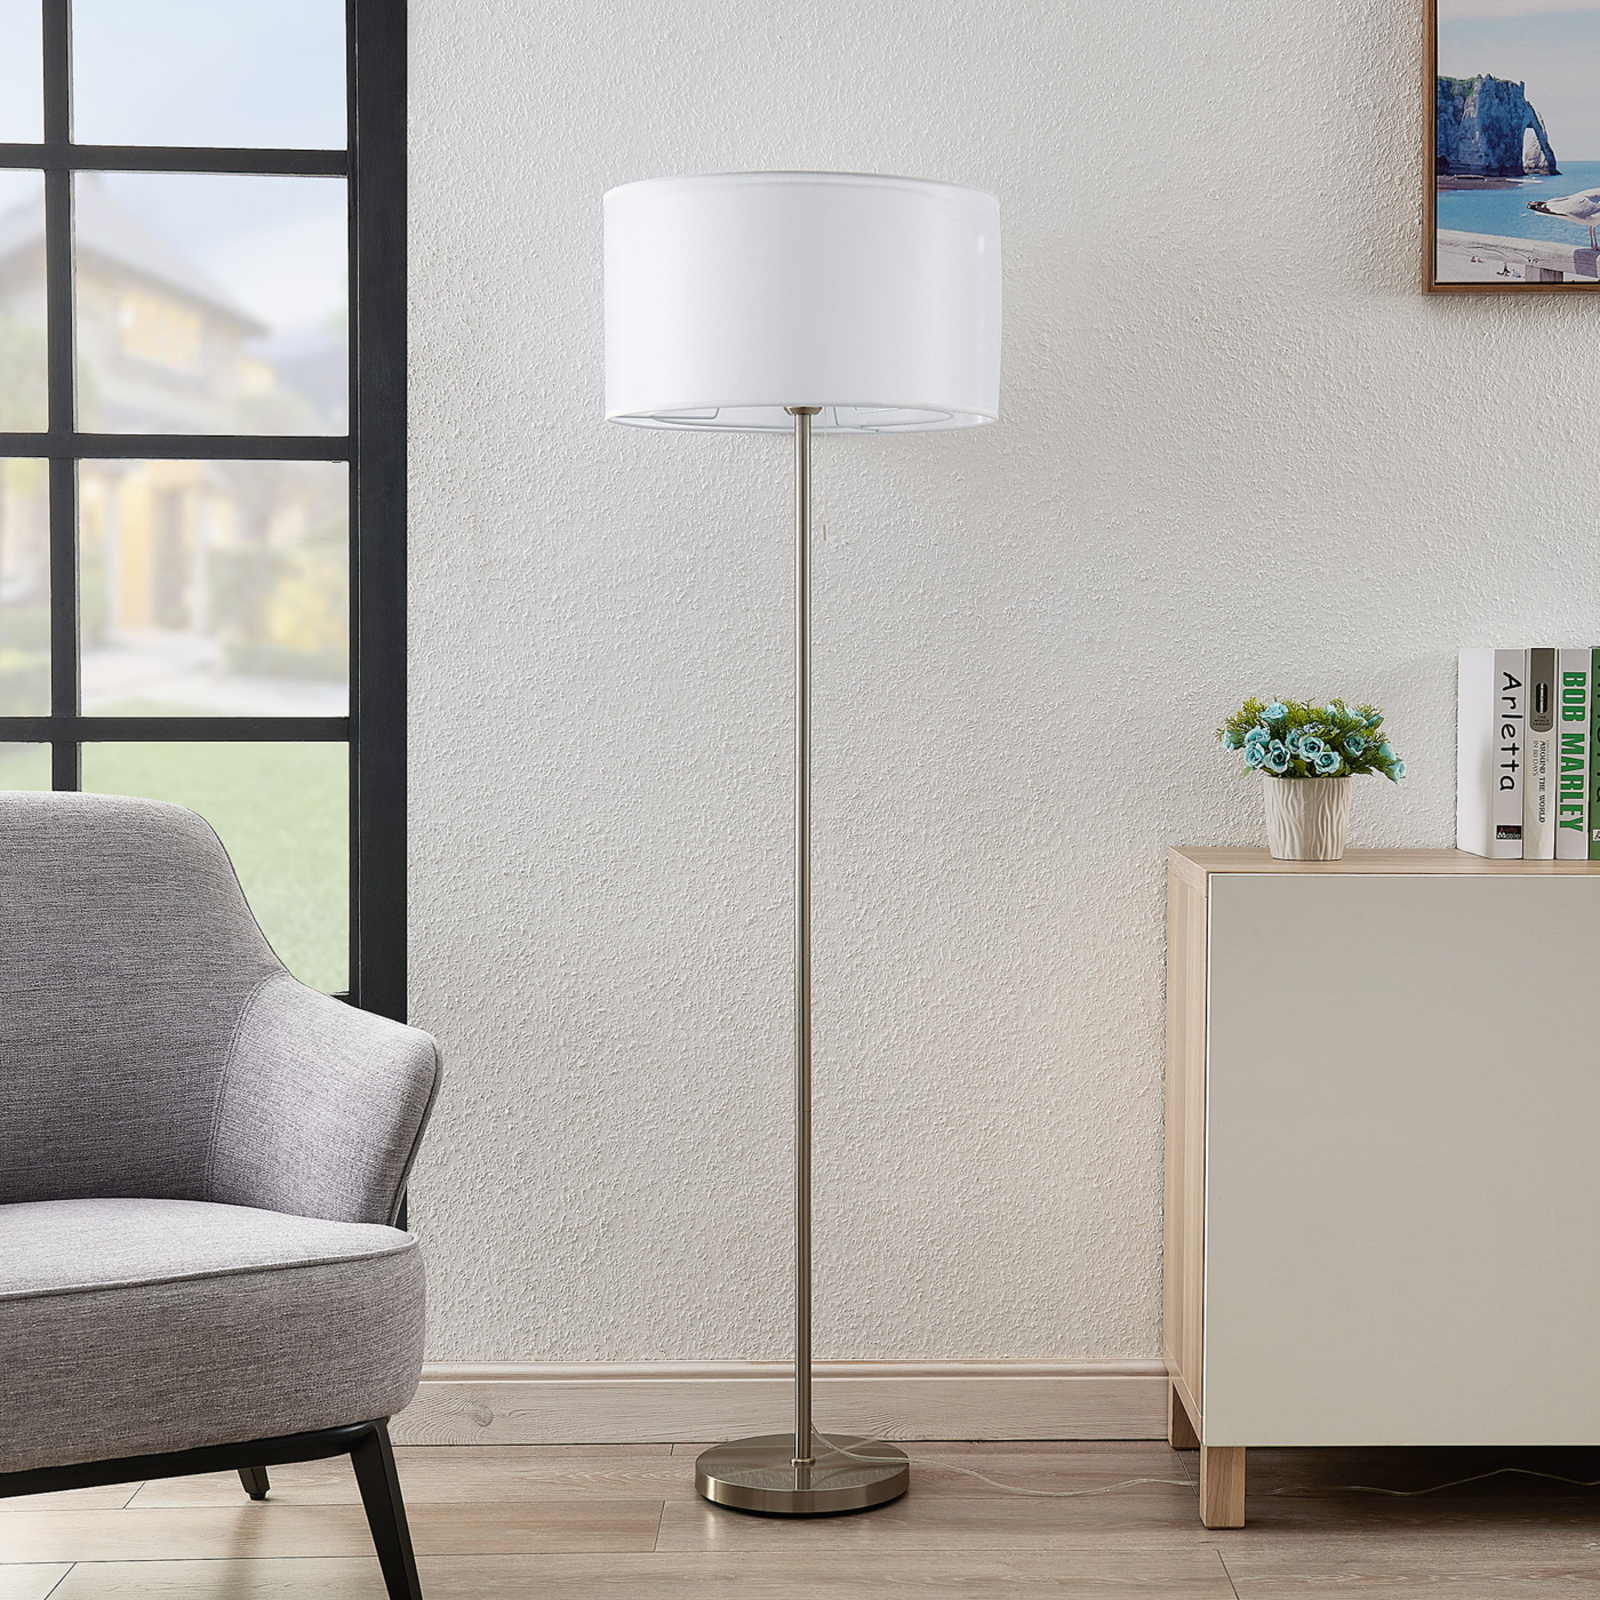 Lindby Taxima floor lamp, white